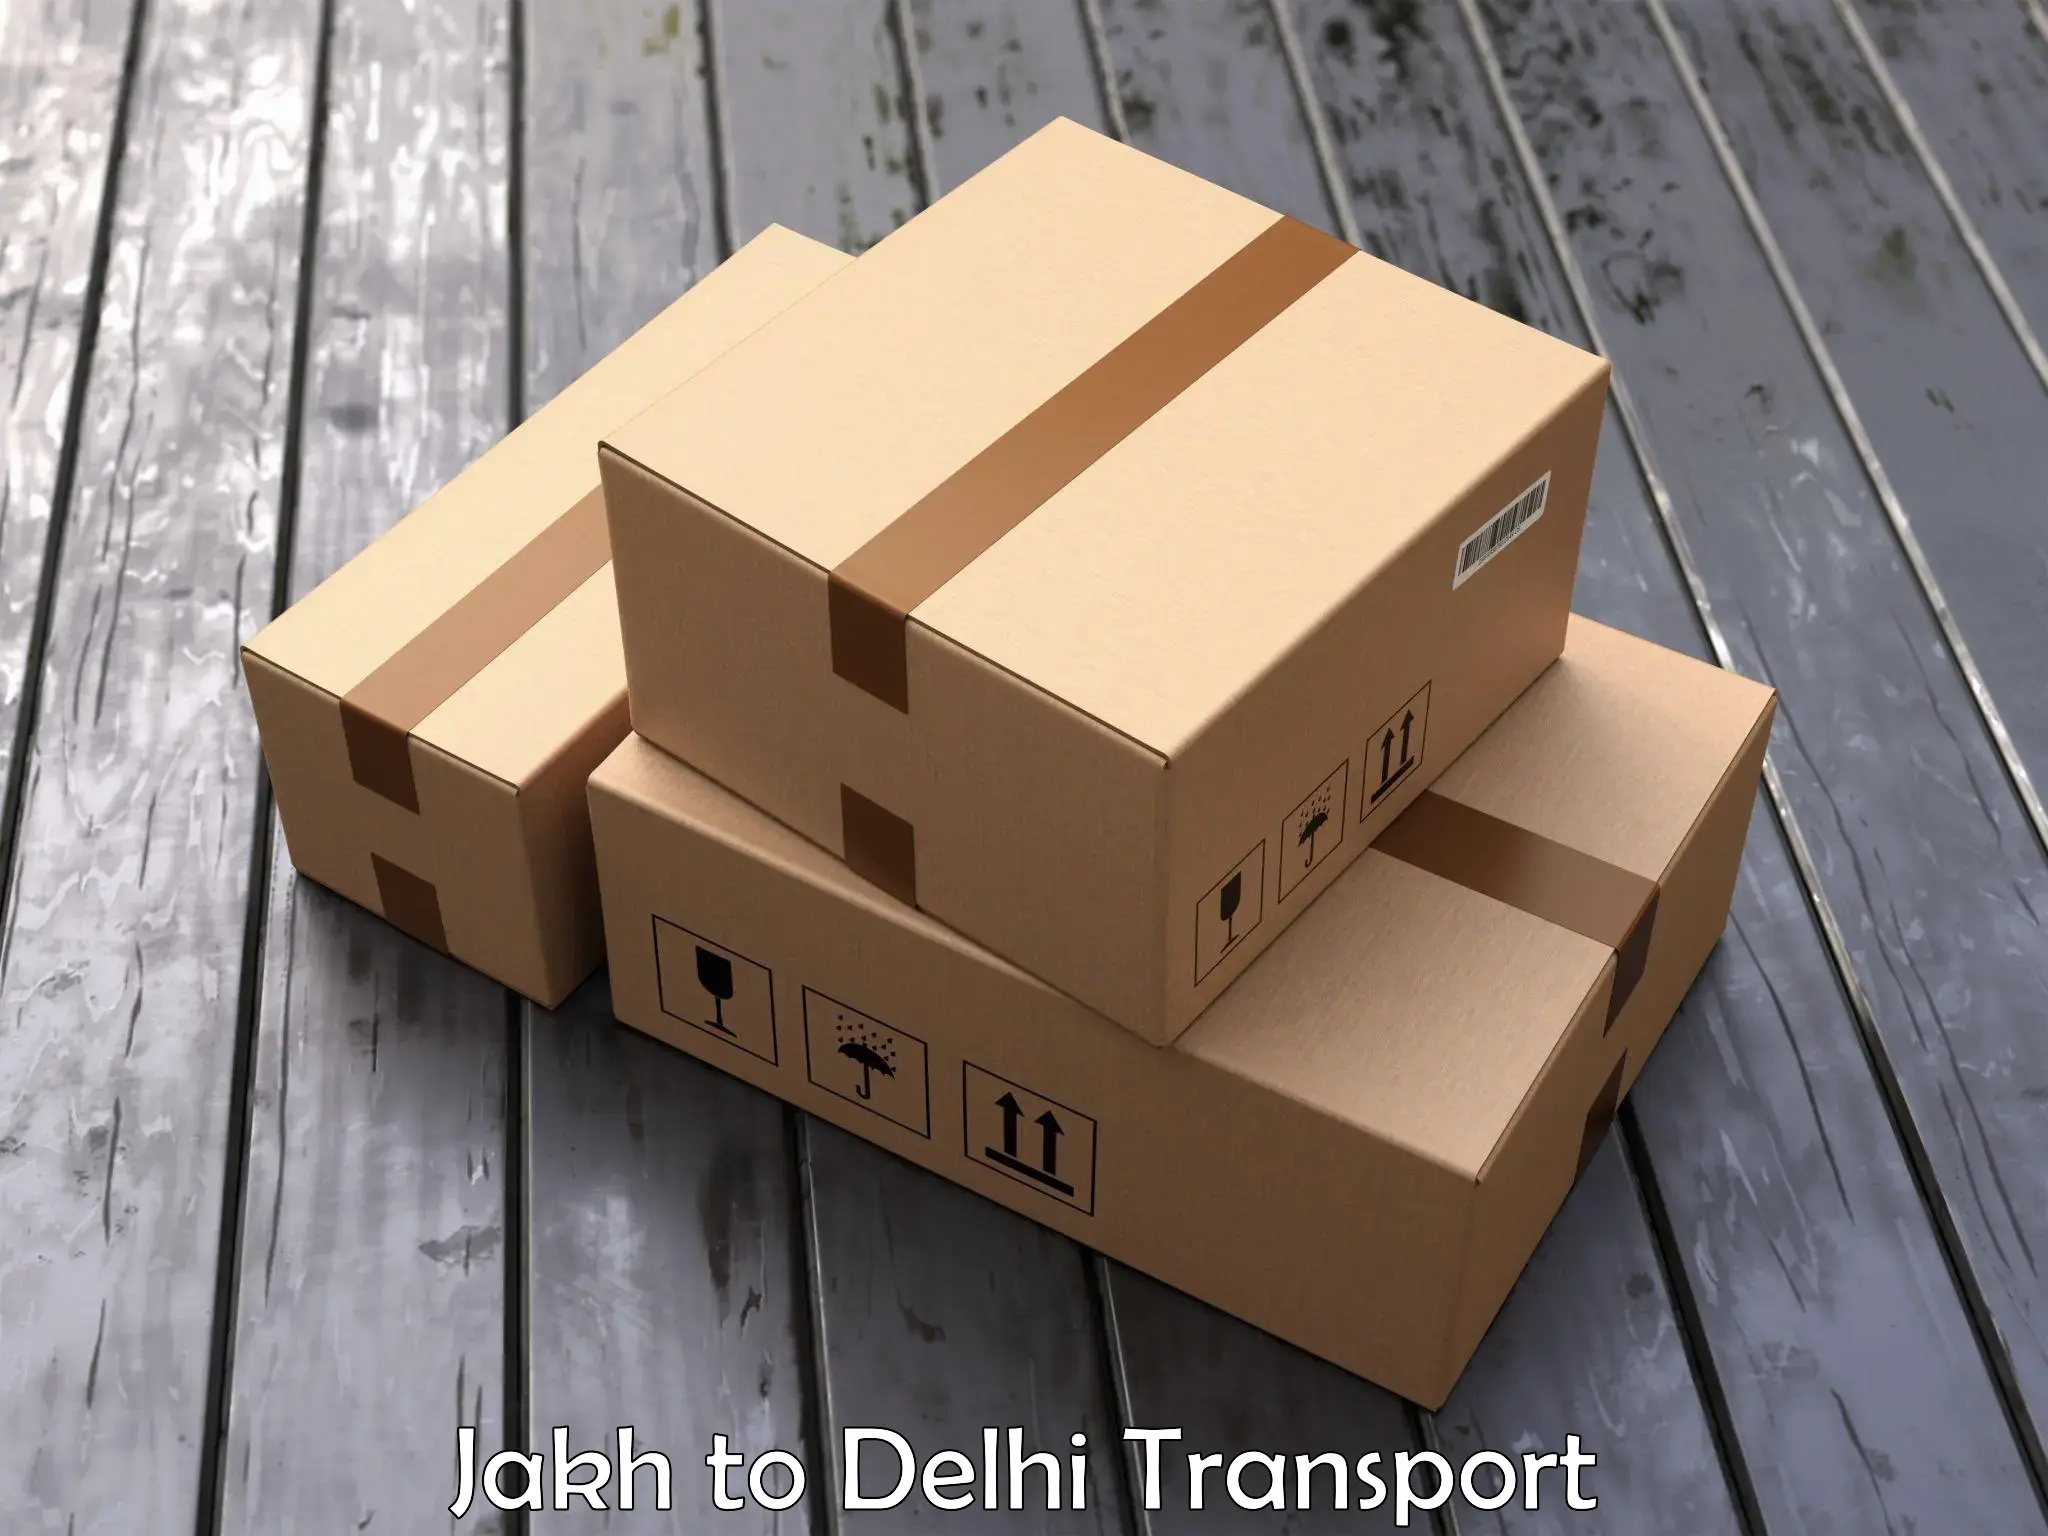 Truck transport companies in India Jakh to Delhi